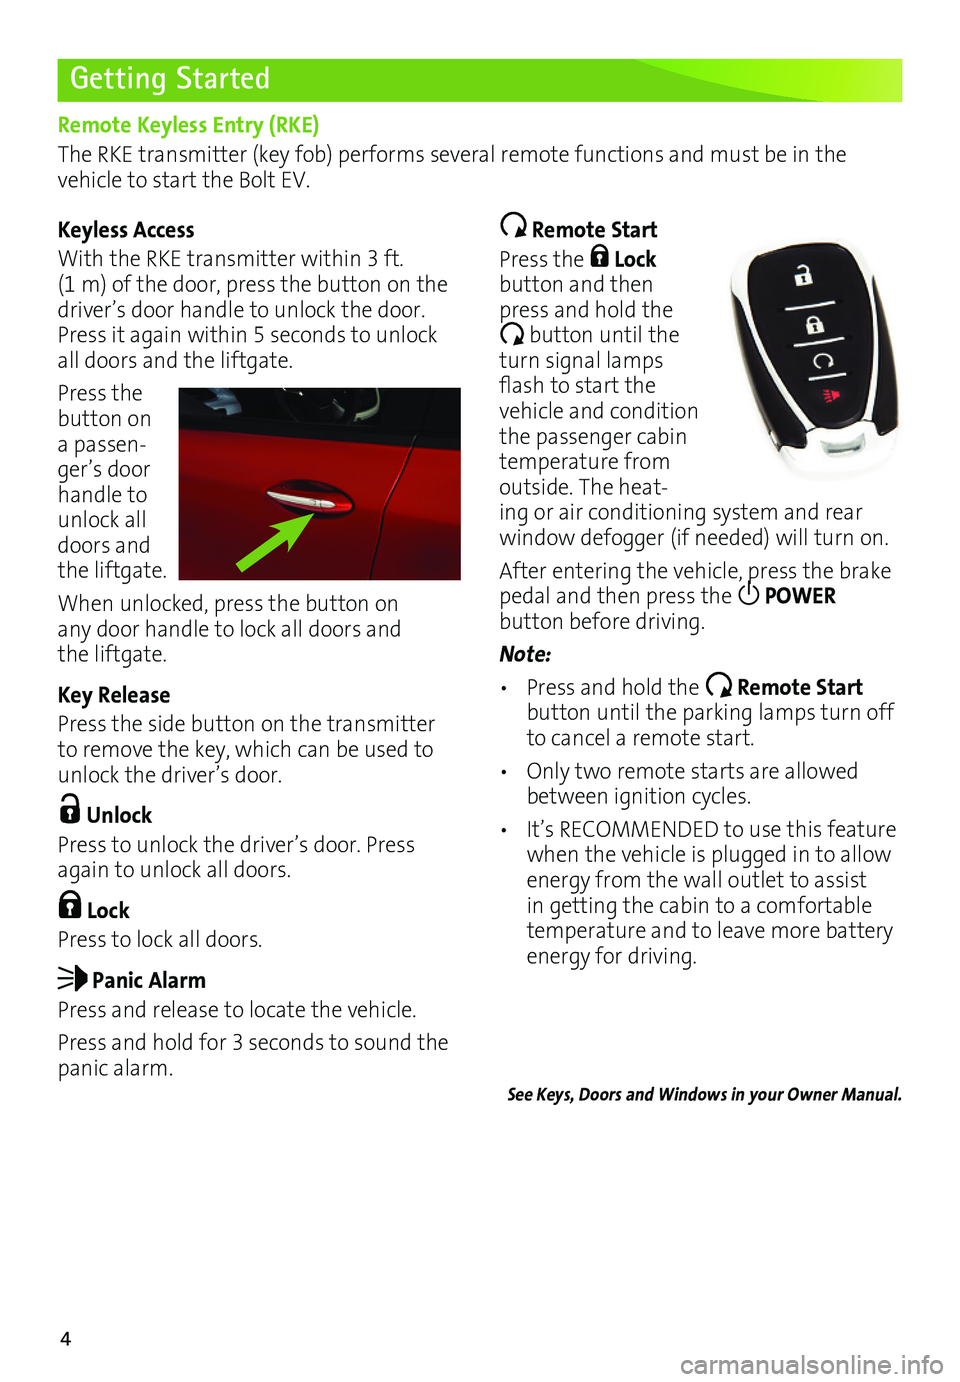 CHEVROLET BOLT EV 2017  Owners Manual 4
Getting Started
Remote Keyless Entry (RKE)
The RKE transmitter (key fob) performs several remote functions and must be in the vehicle to start the Bolt EV.
Keyless Access
With the RKE transmitter wi